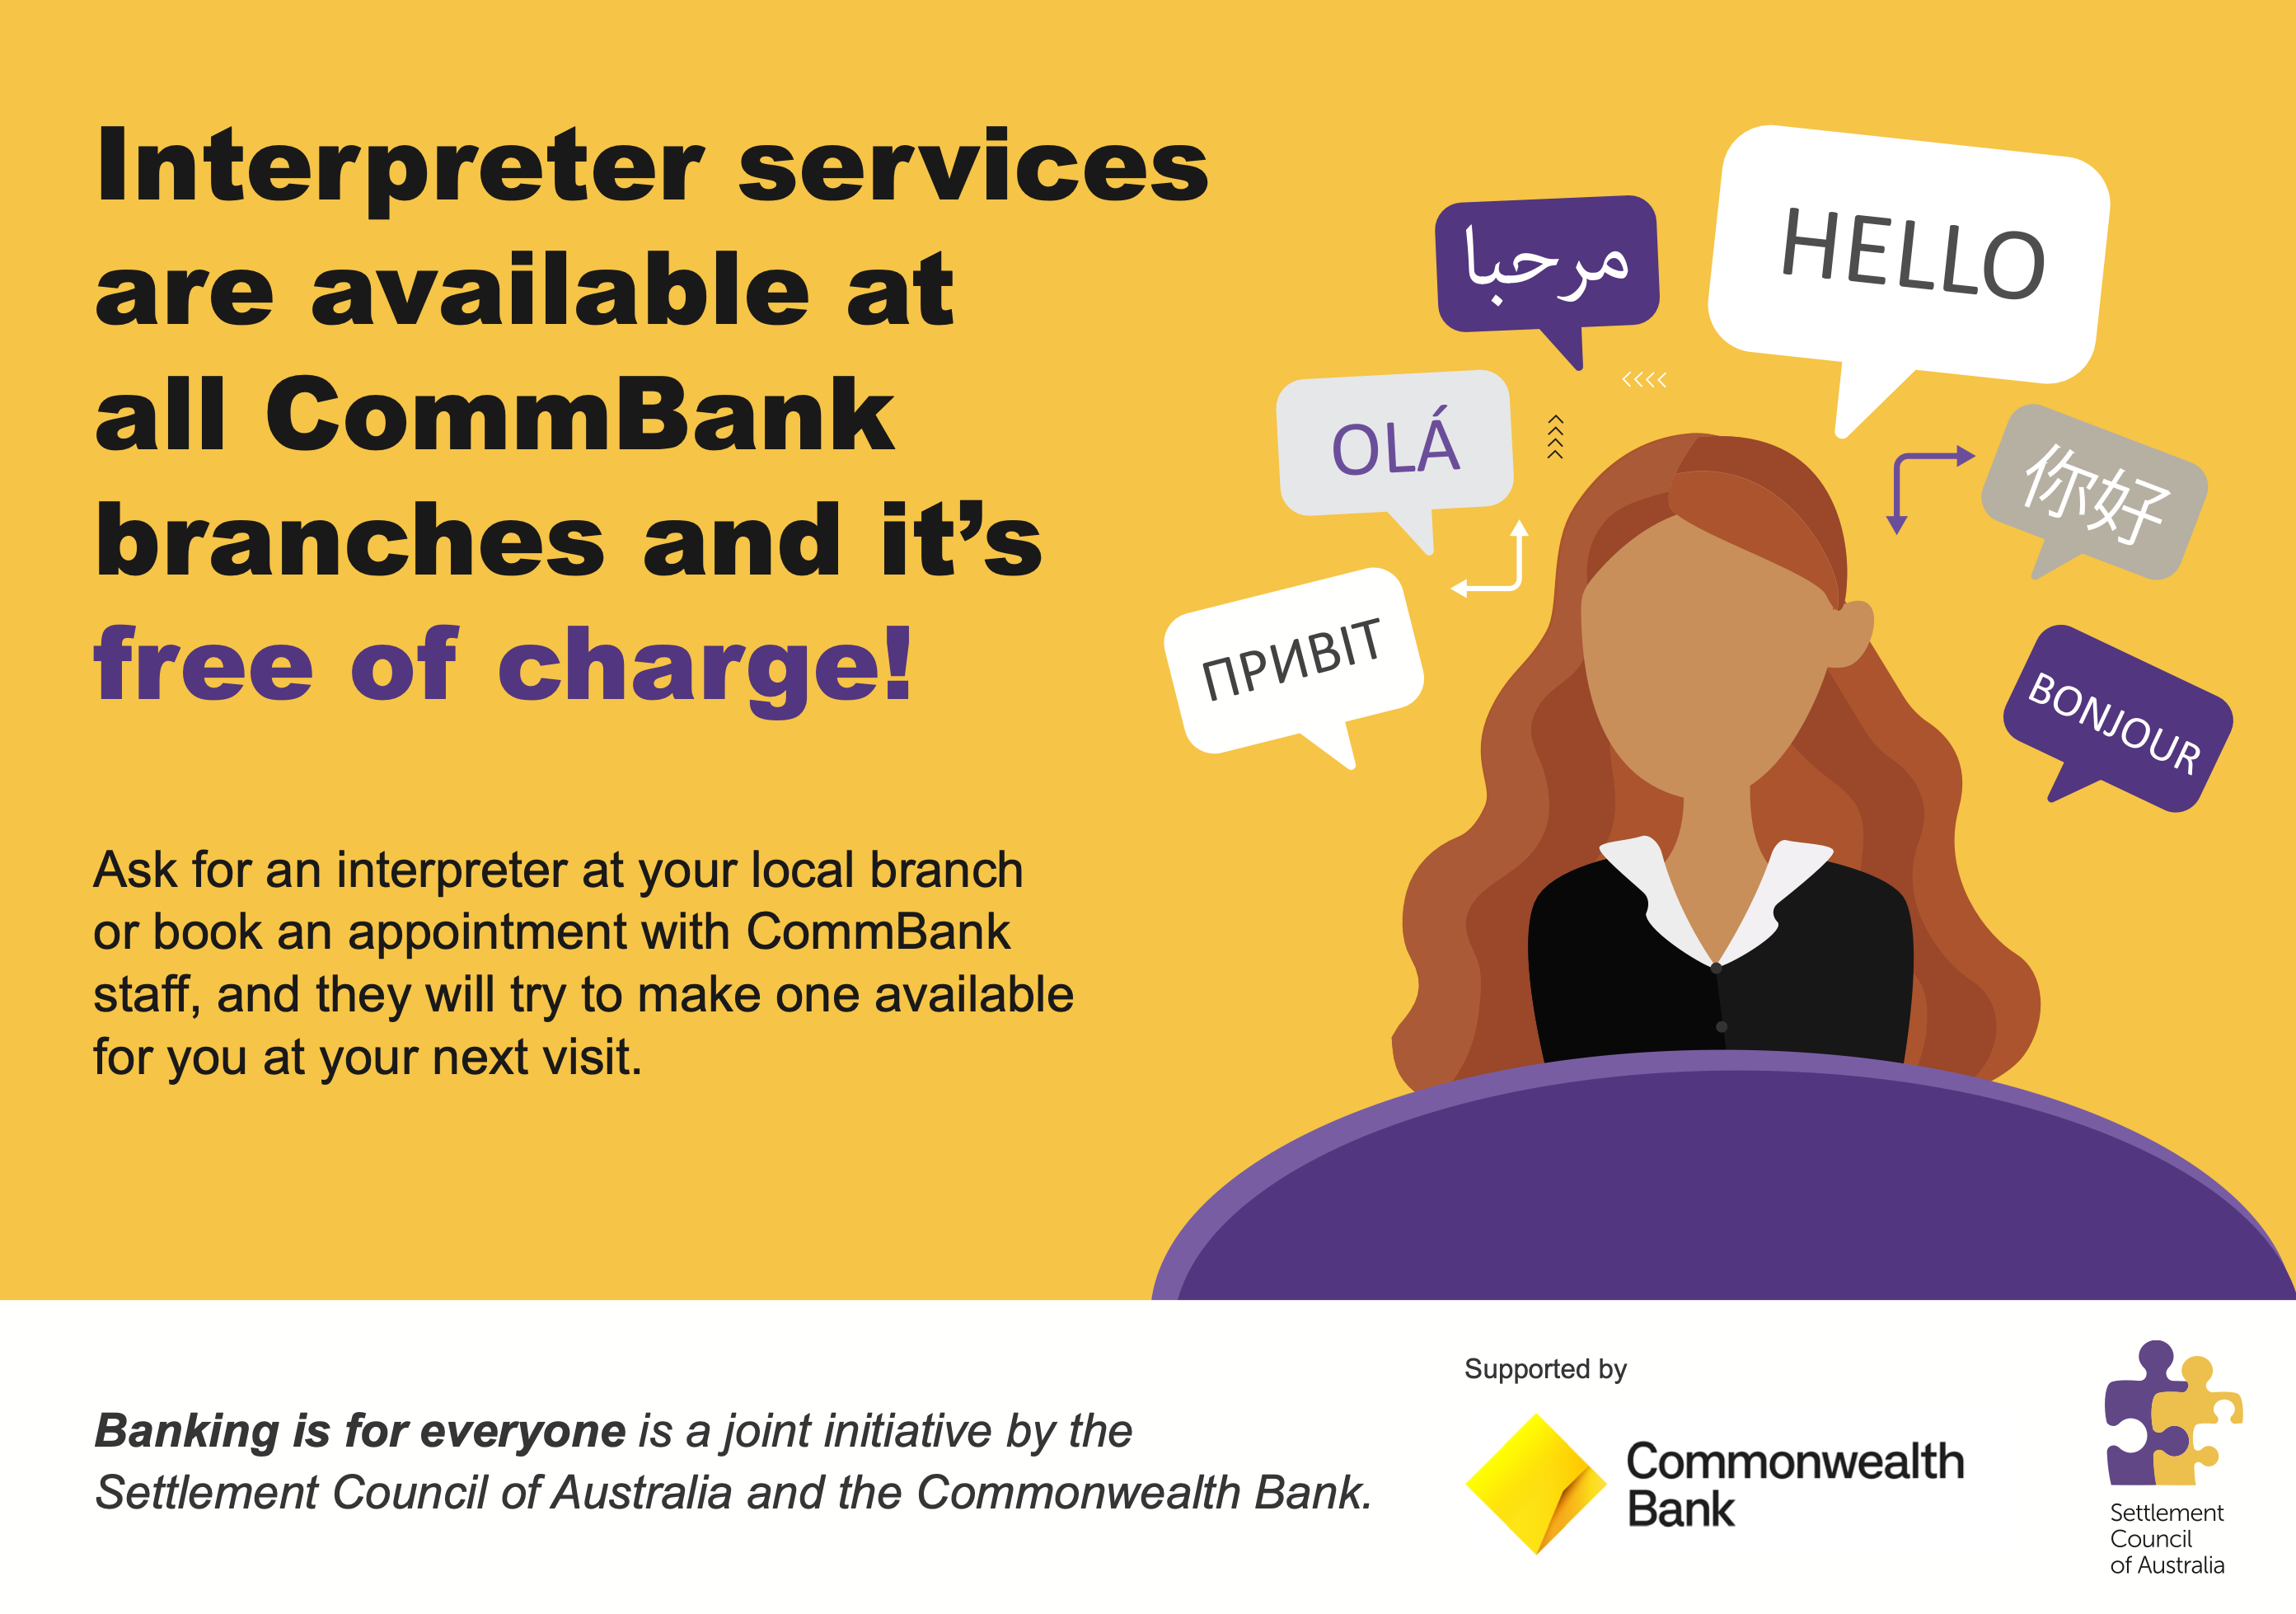 Banking is for everyone flyer explaining interpreter services from Commonwealth Bank